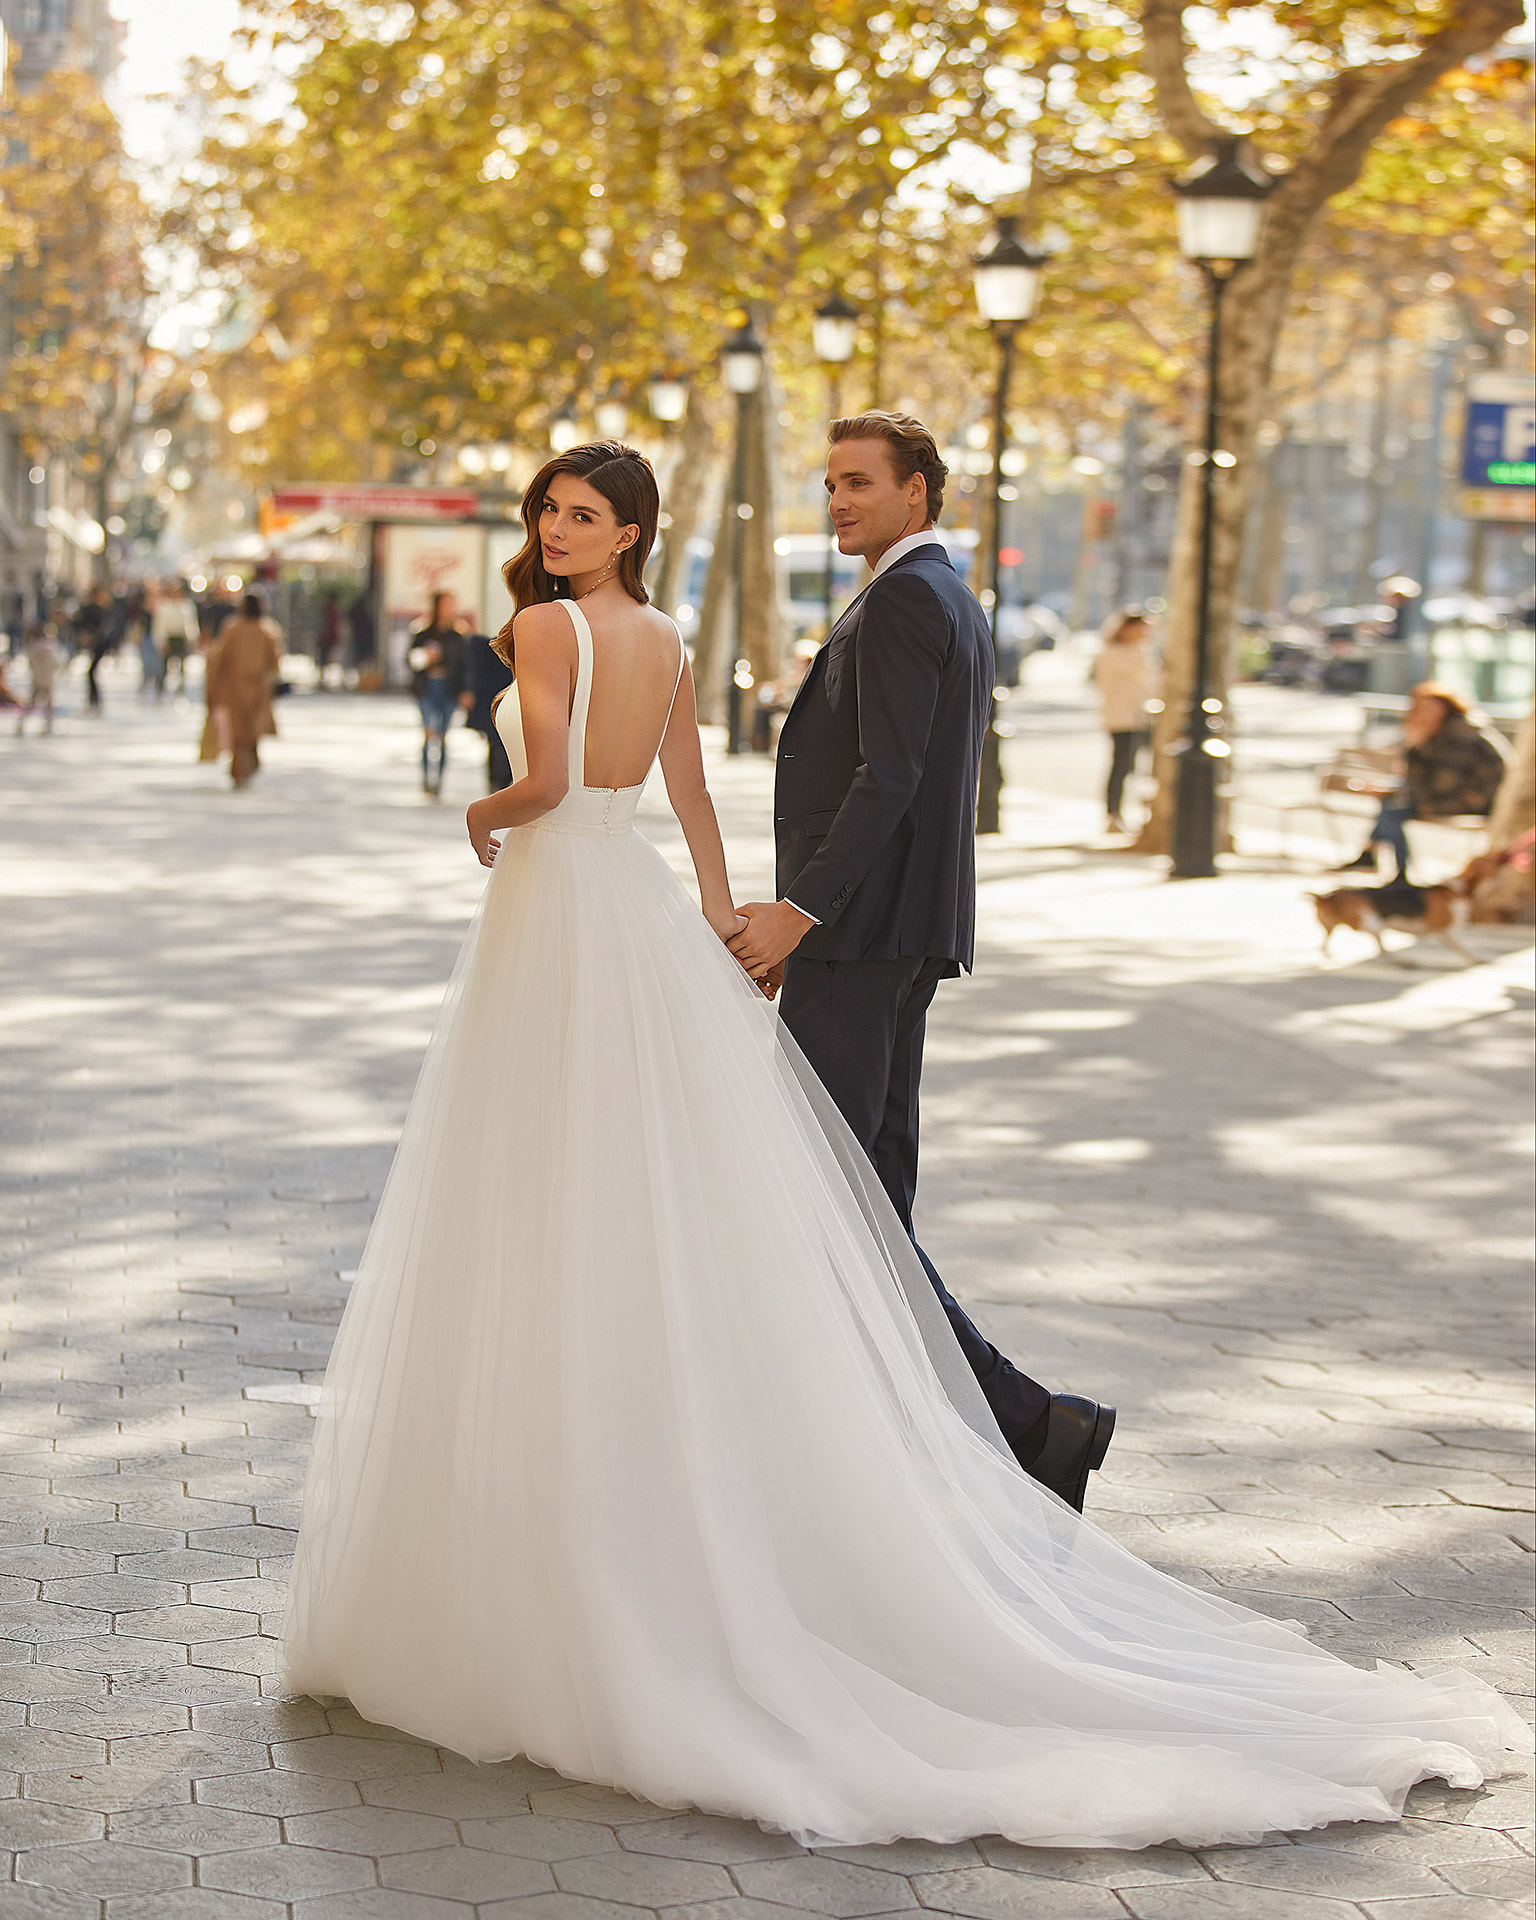 Two-piece wedding dress with trousers made of crespon, including a tulle overskirt; with a square neckline, an open back, and straps. Exclusive Luna Novias outfit made of crespon and tulle for the overskirt. LUNA_NOVIAS.